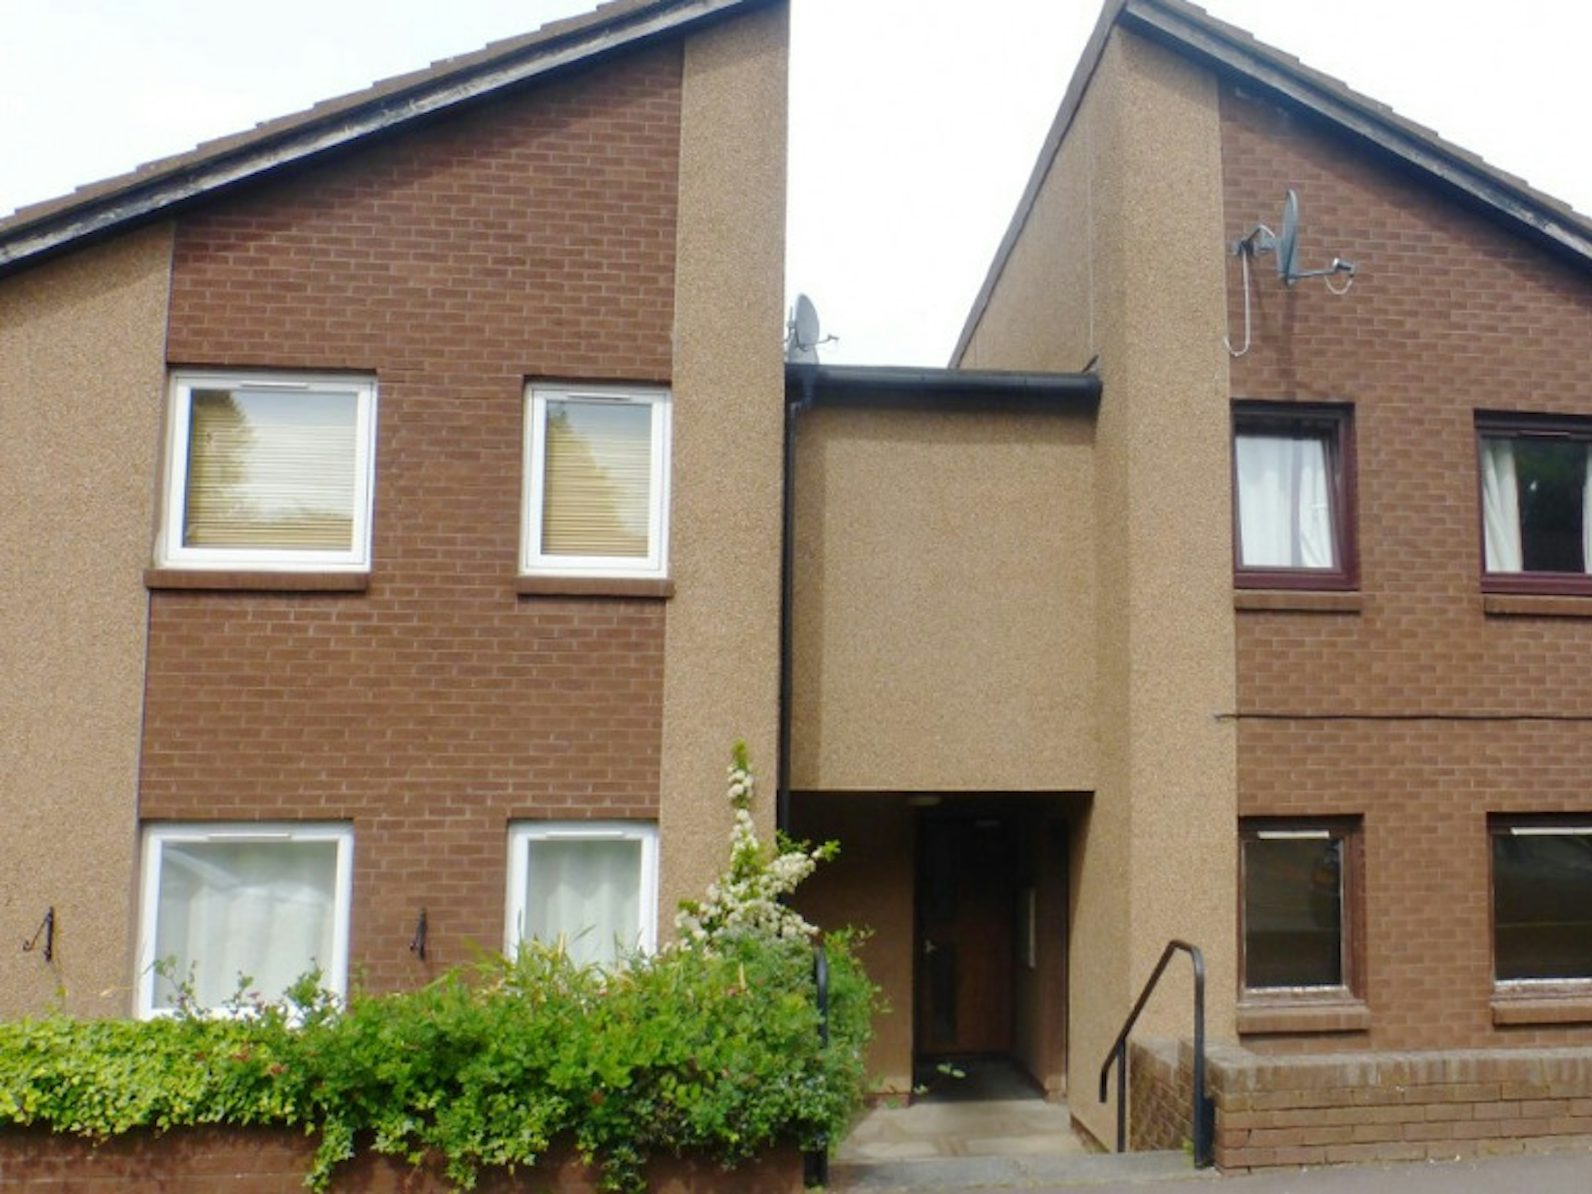 Studio Flat to rent on Shelley Gardens Law, Dundee, DD3